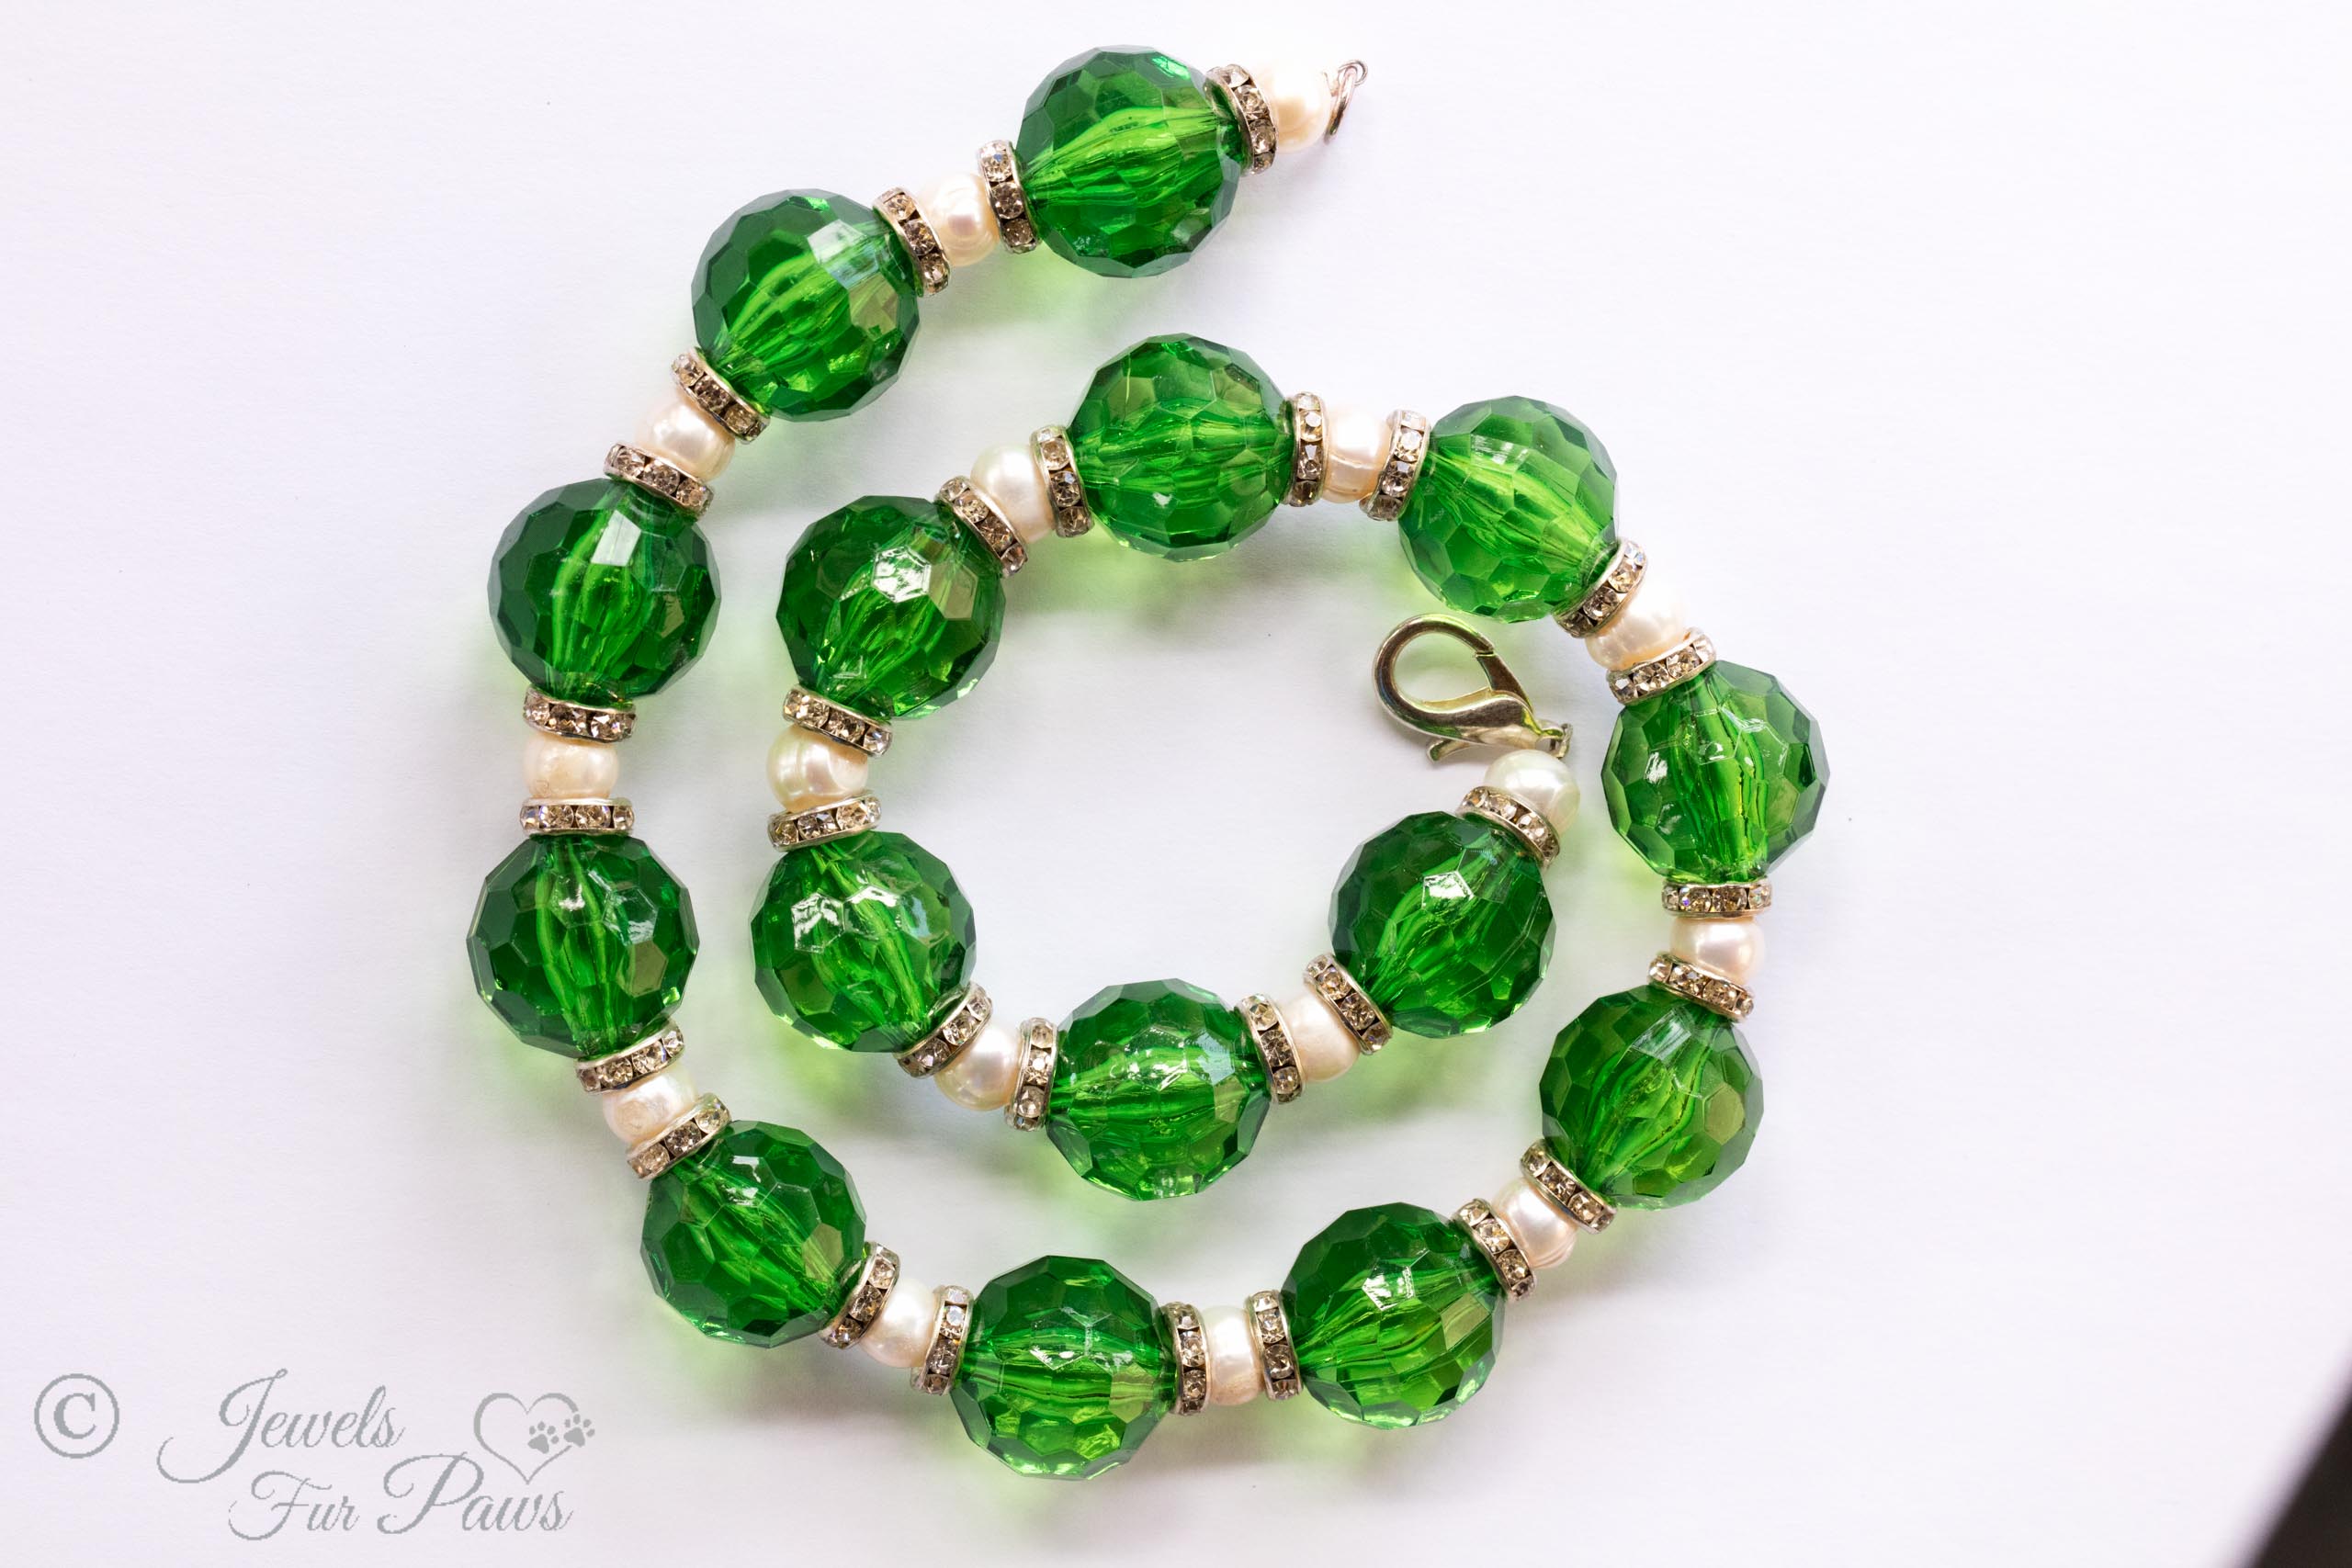 round green acrylic faceted beads strung with cultured pearls and channel set Swarovski crystal spacers on white background